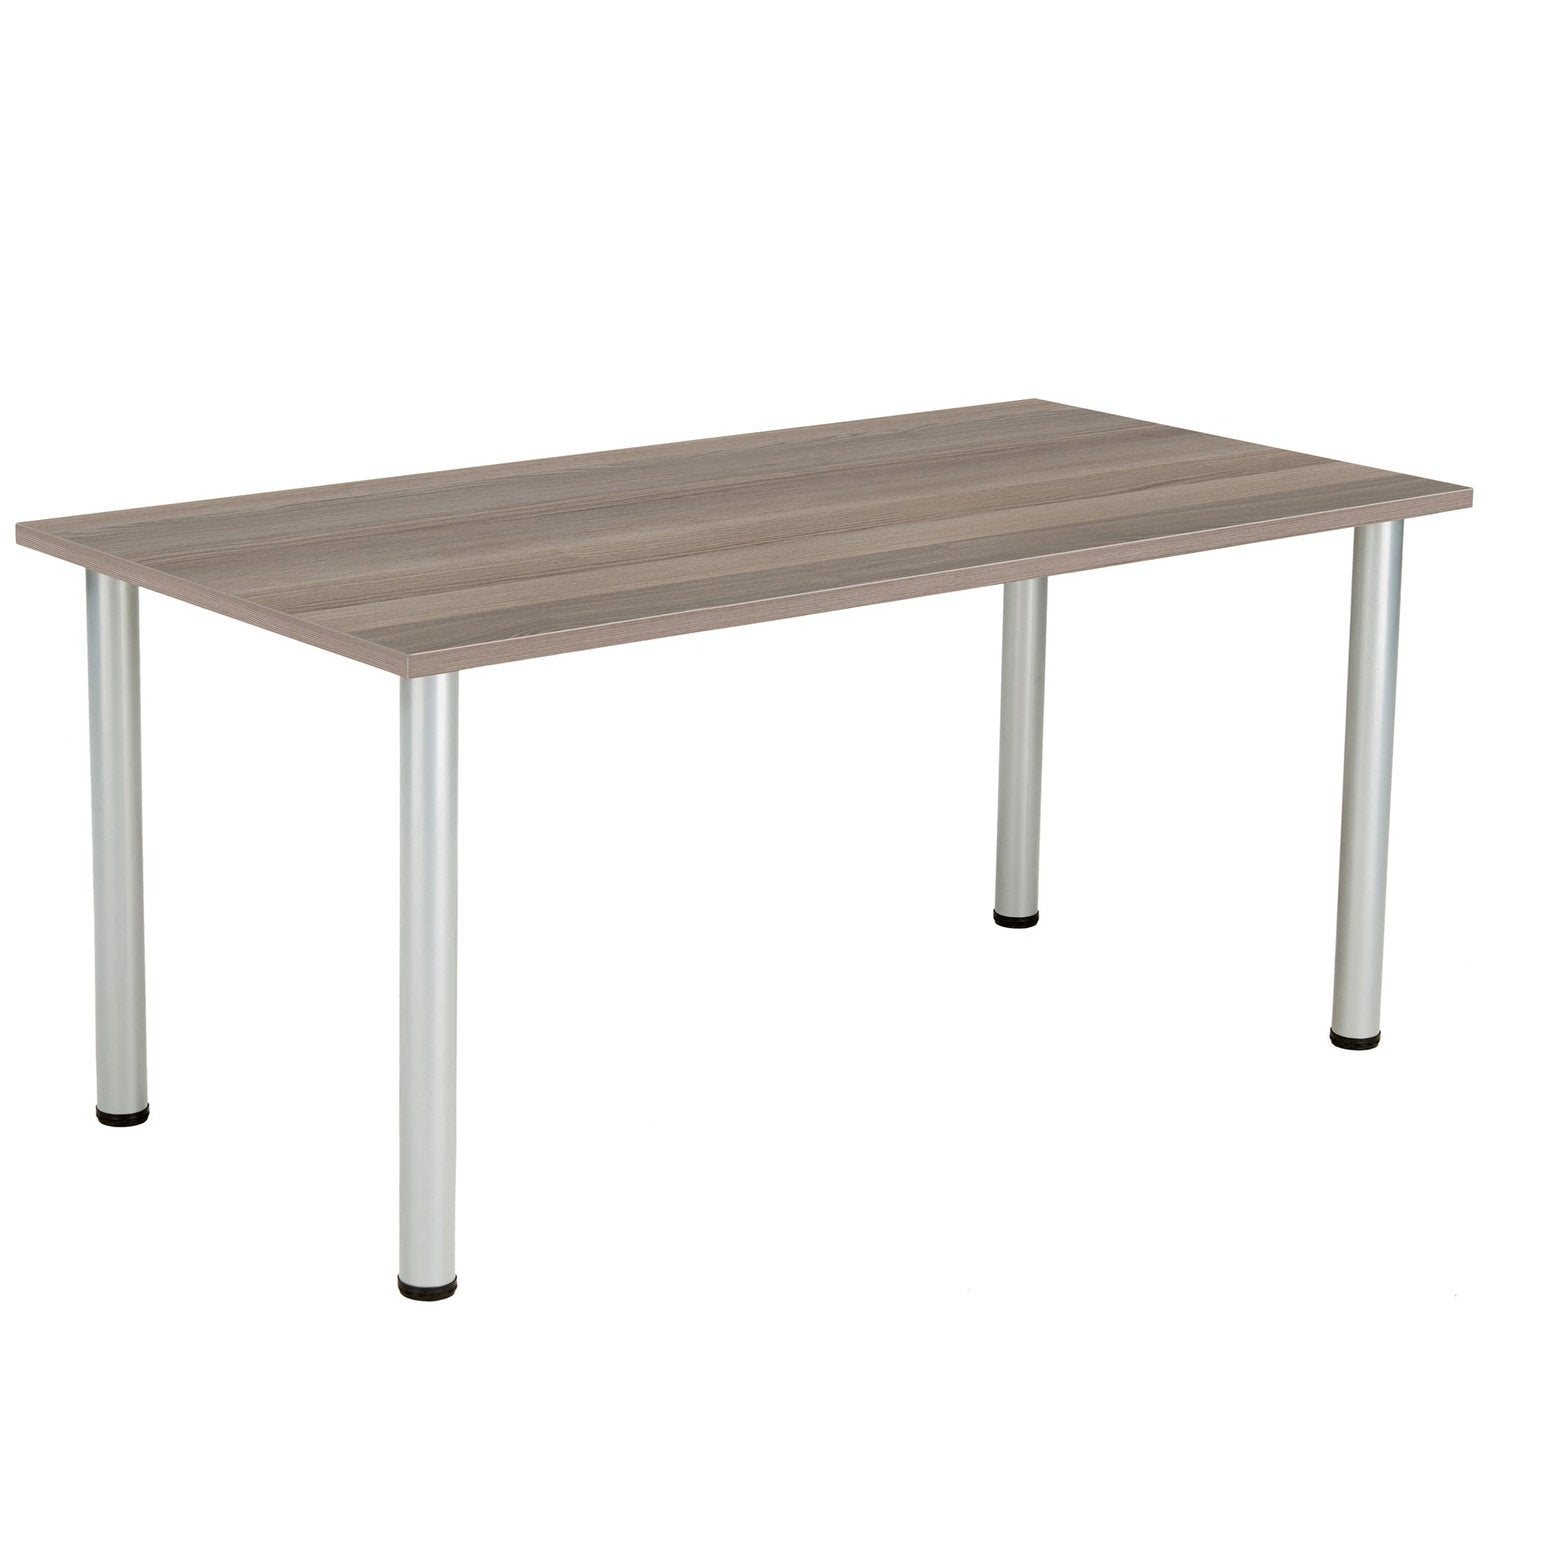 One Fraction Plus Straight 1600mm Meeting Table